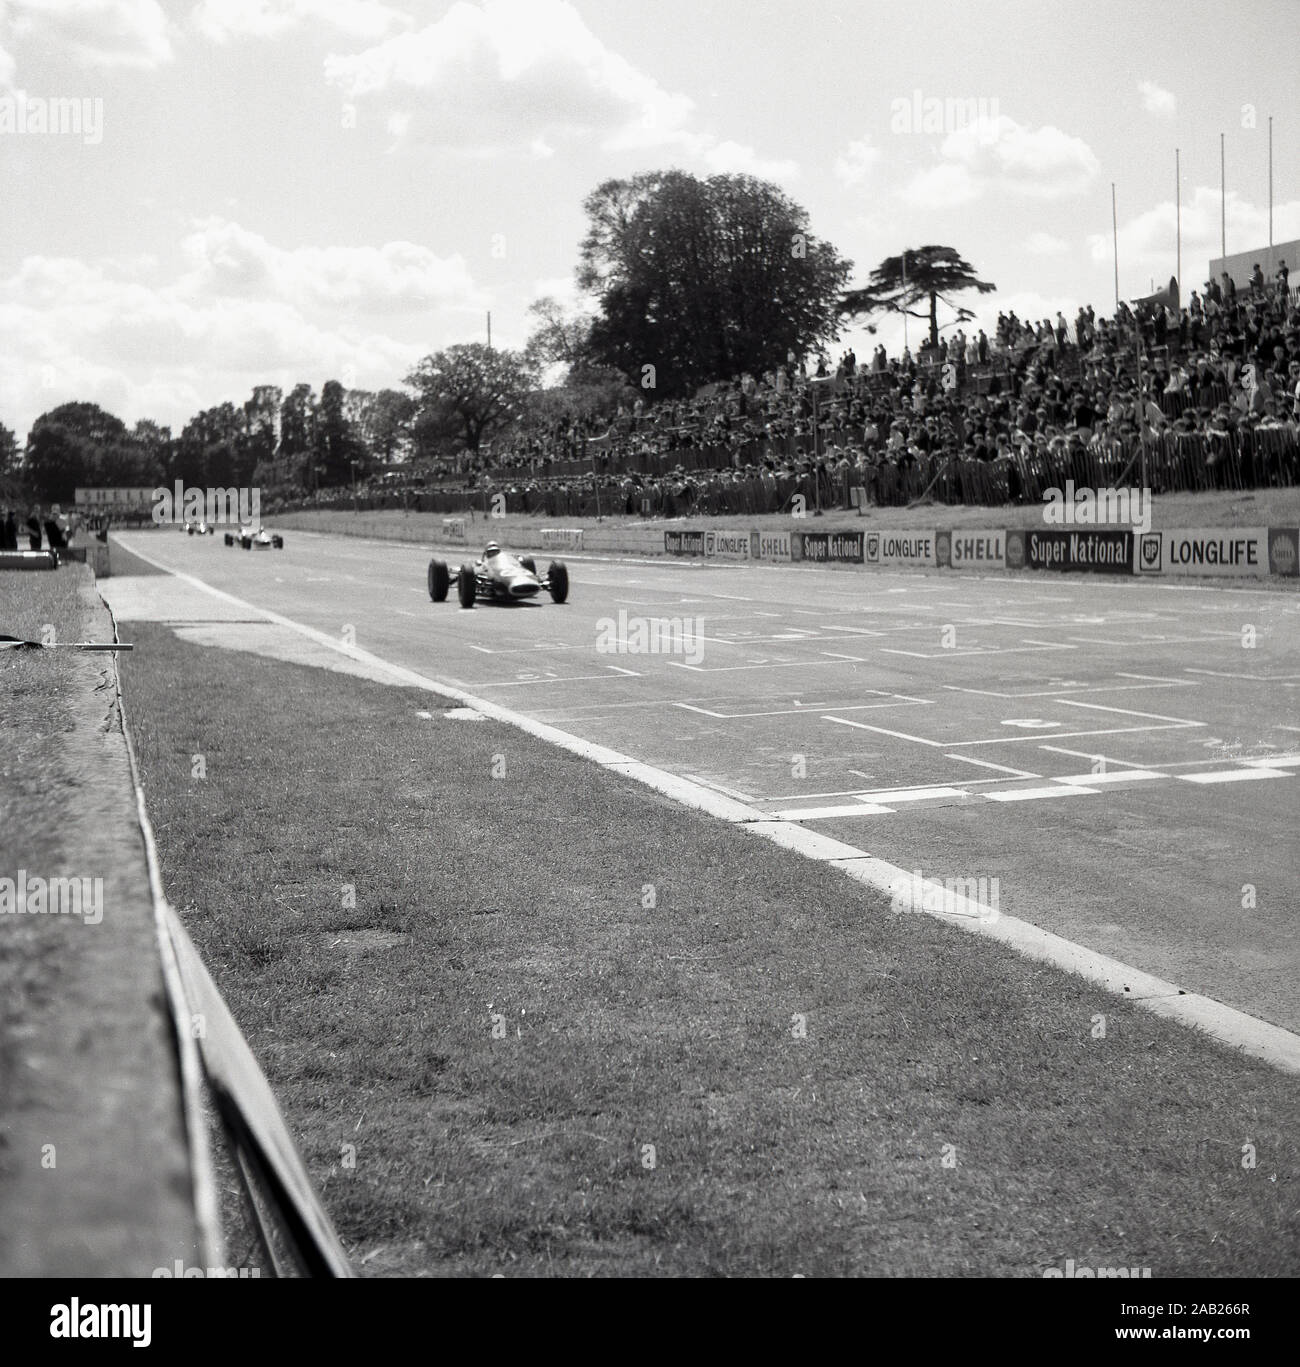 1960s, historical, motor racing at the Crystal Palace race circuit in Crystal Palace park in South London, London, England, UK, a car comes down the finishing straight watched by a crowd of spectators. Stock Photo